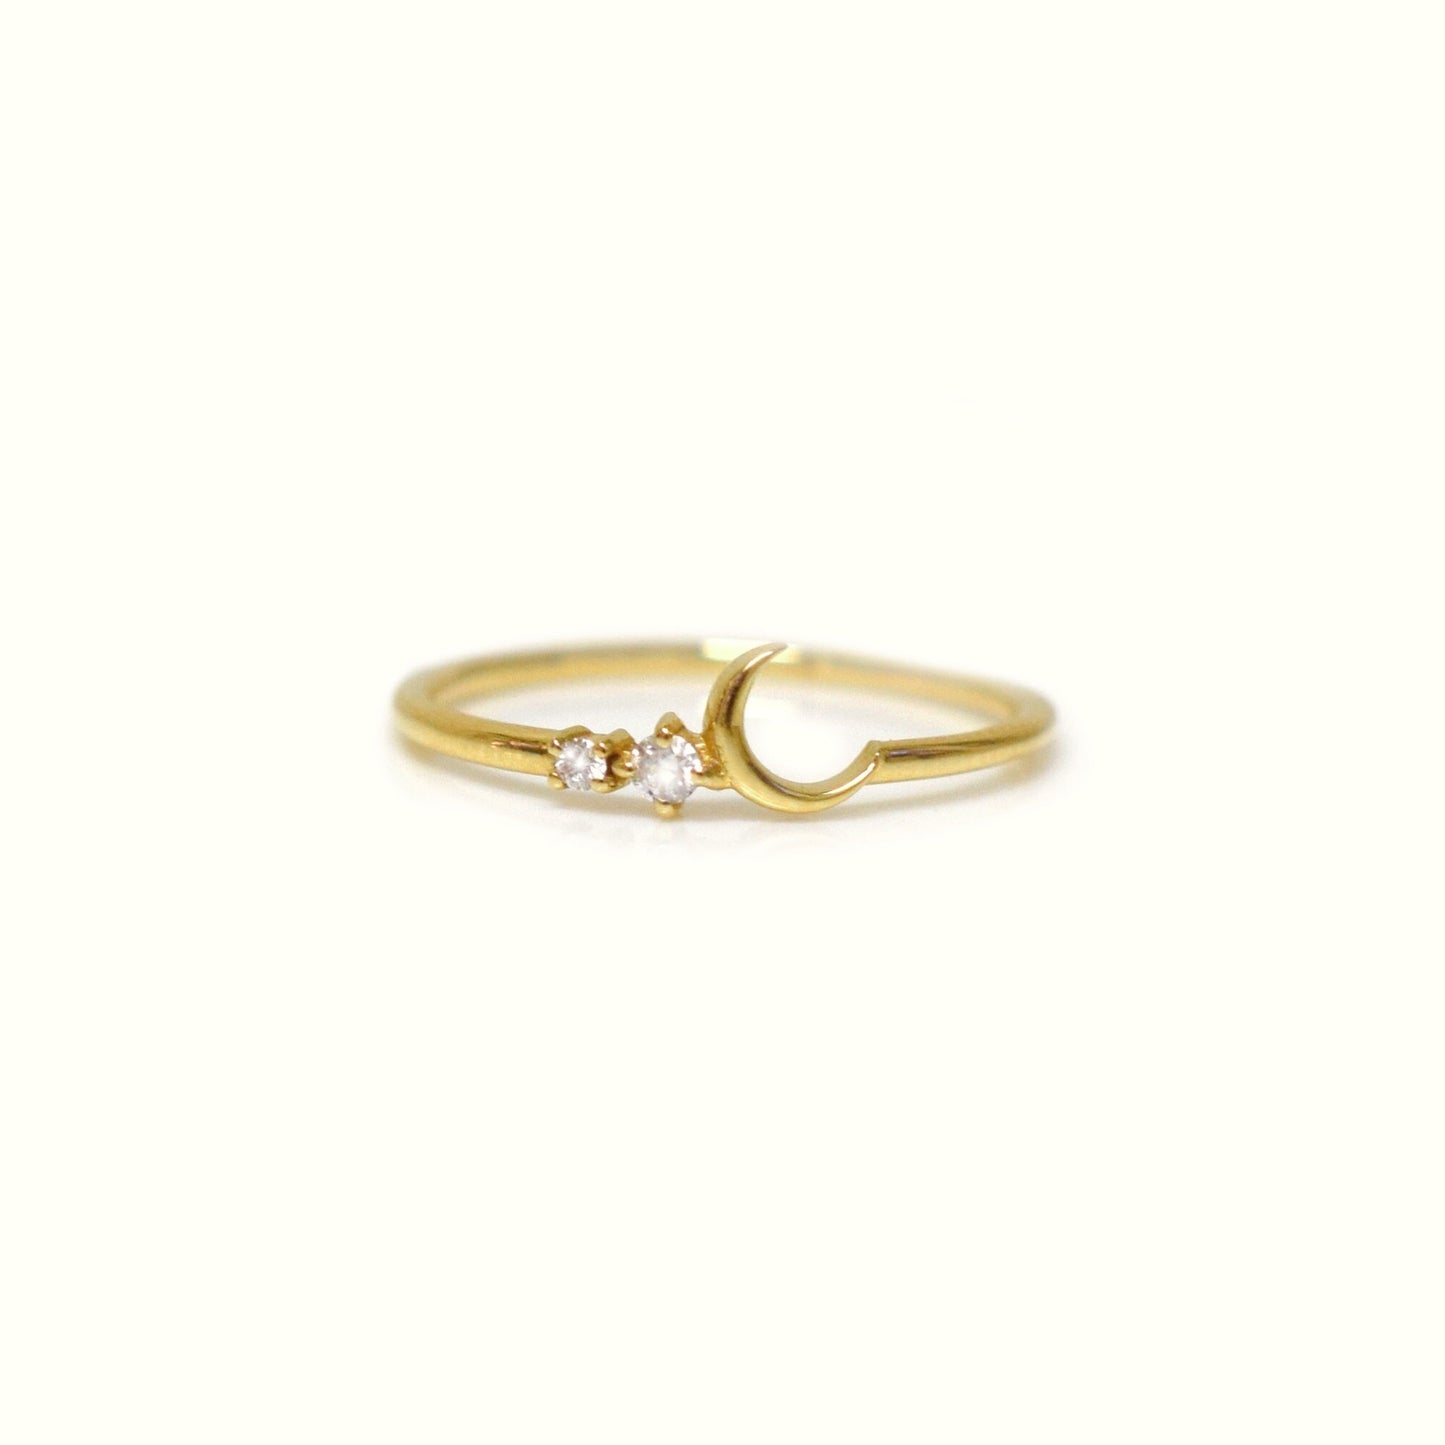 14kt Gold Fly me to the Moon Ring by La Kaiser. Sold exclusively in South Africa online at Collective and Co, online fine jewellery store